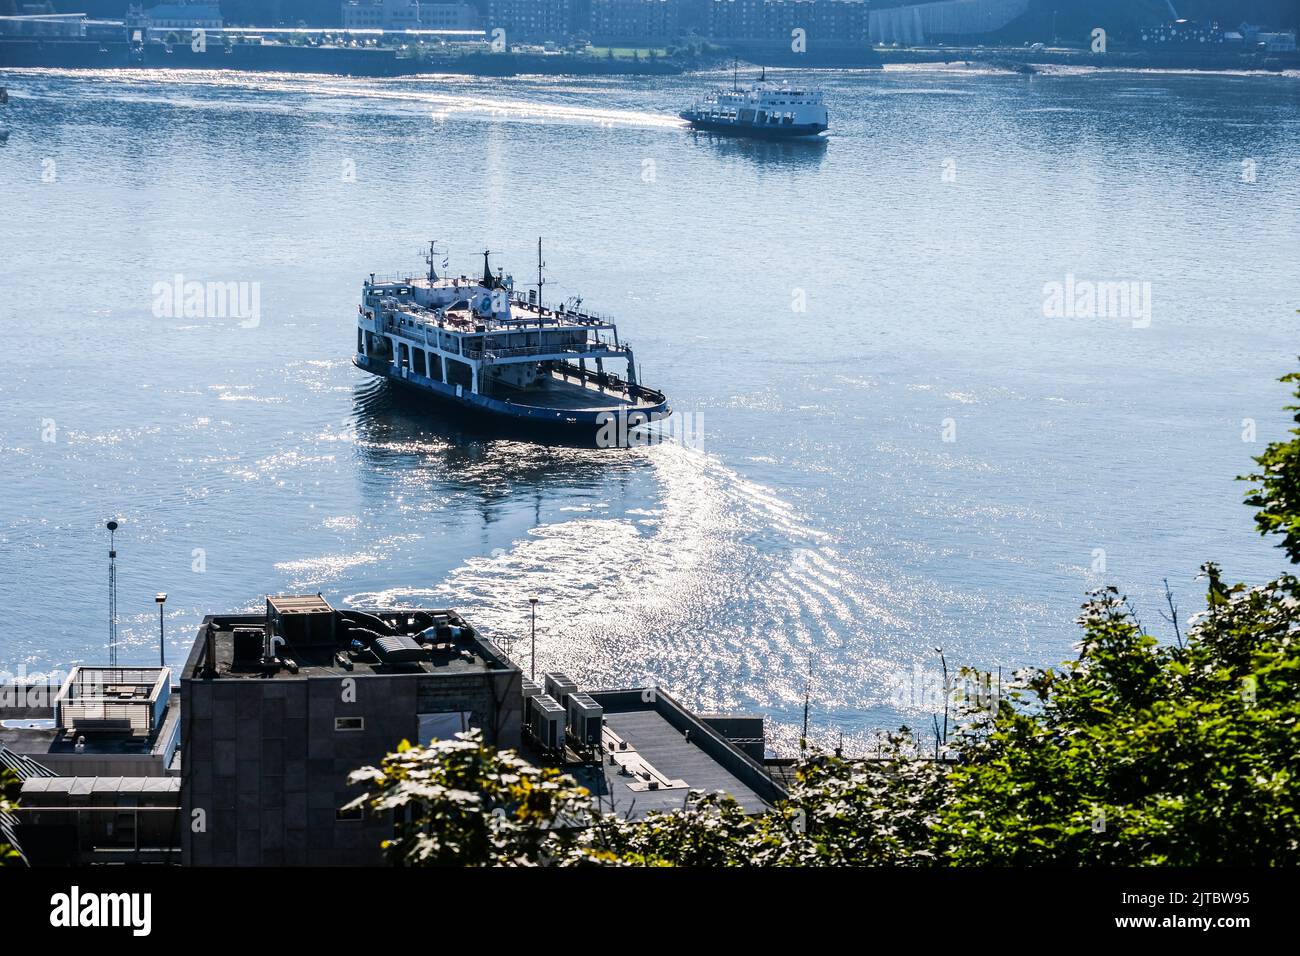 Ferries cross the St. Lawrence River between Quebec City and the city of Levis, Quebec, Canada. Stock Photo